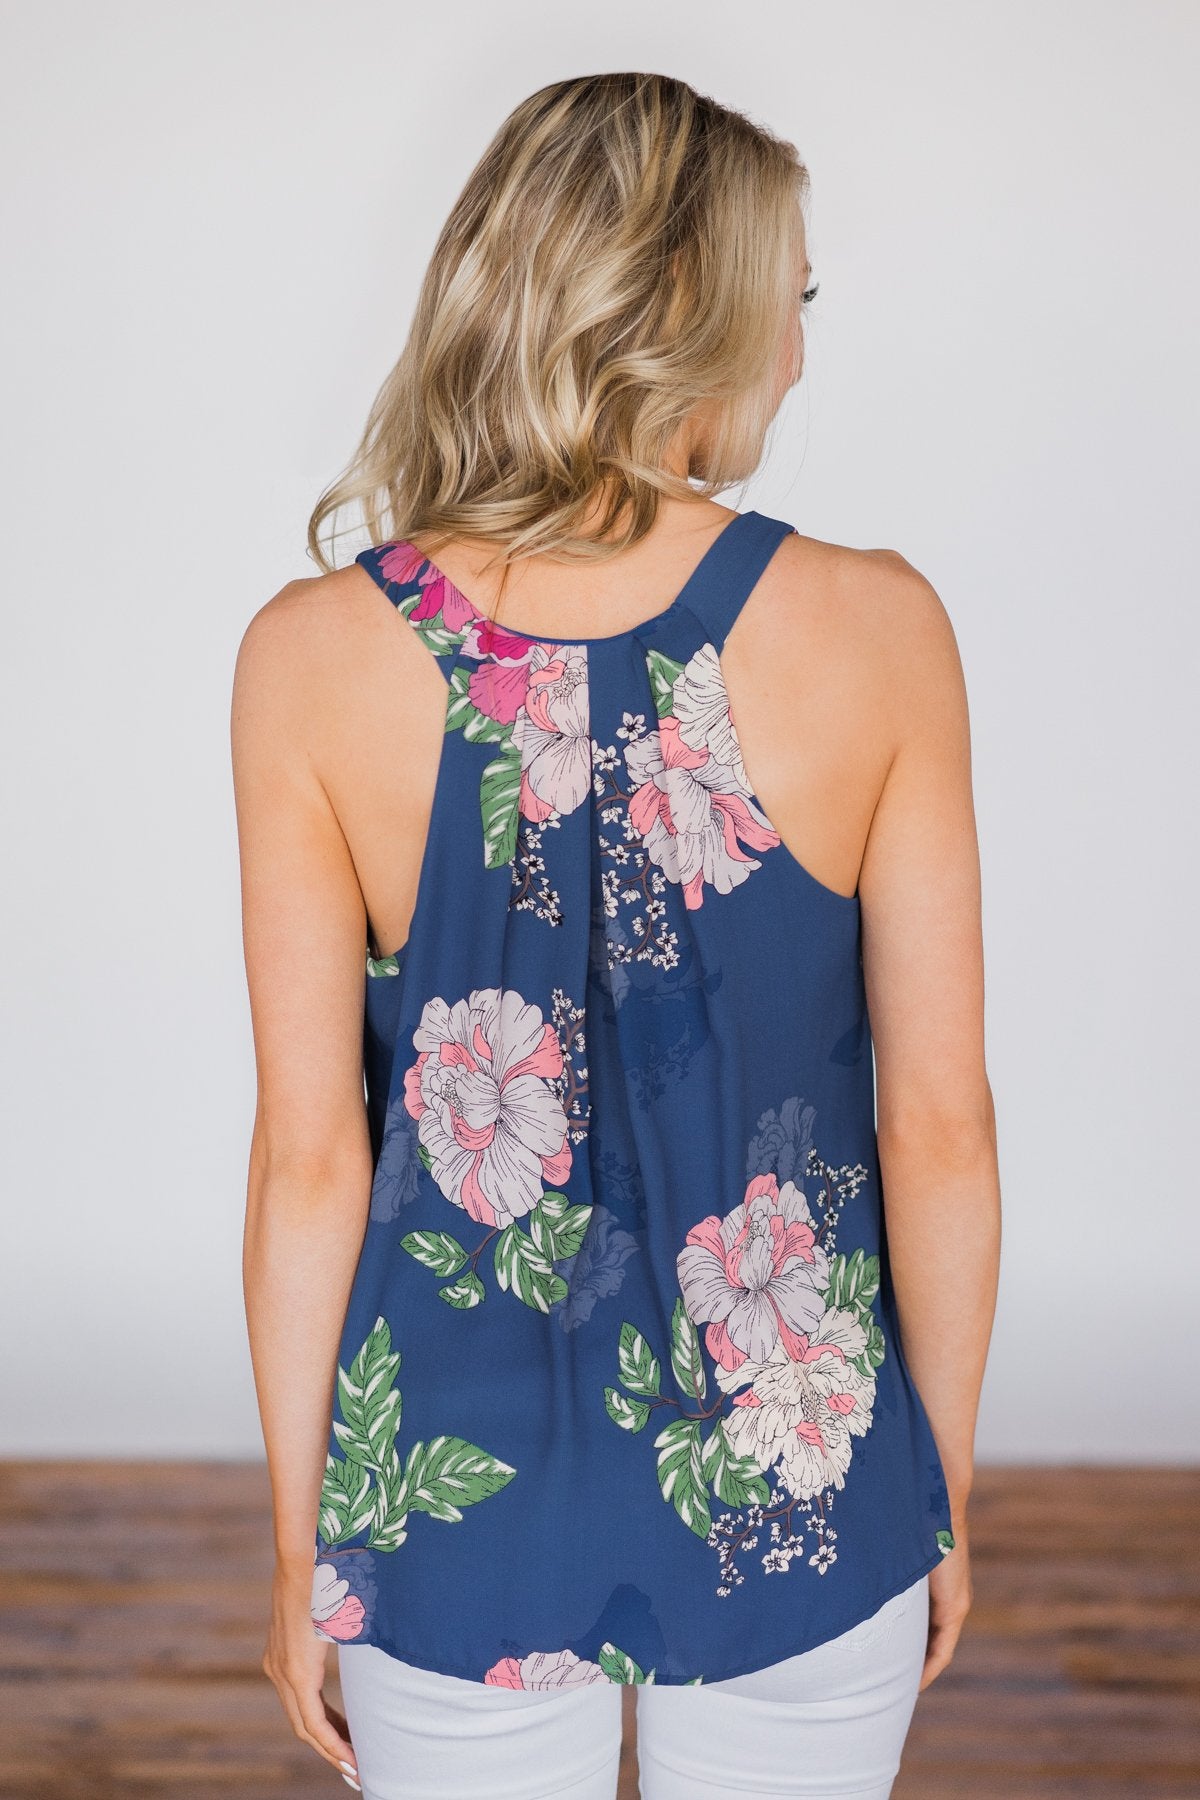 Royally Yours Floral Tank Top